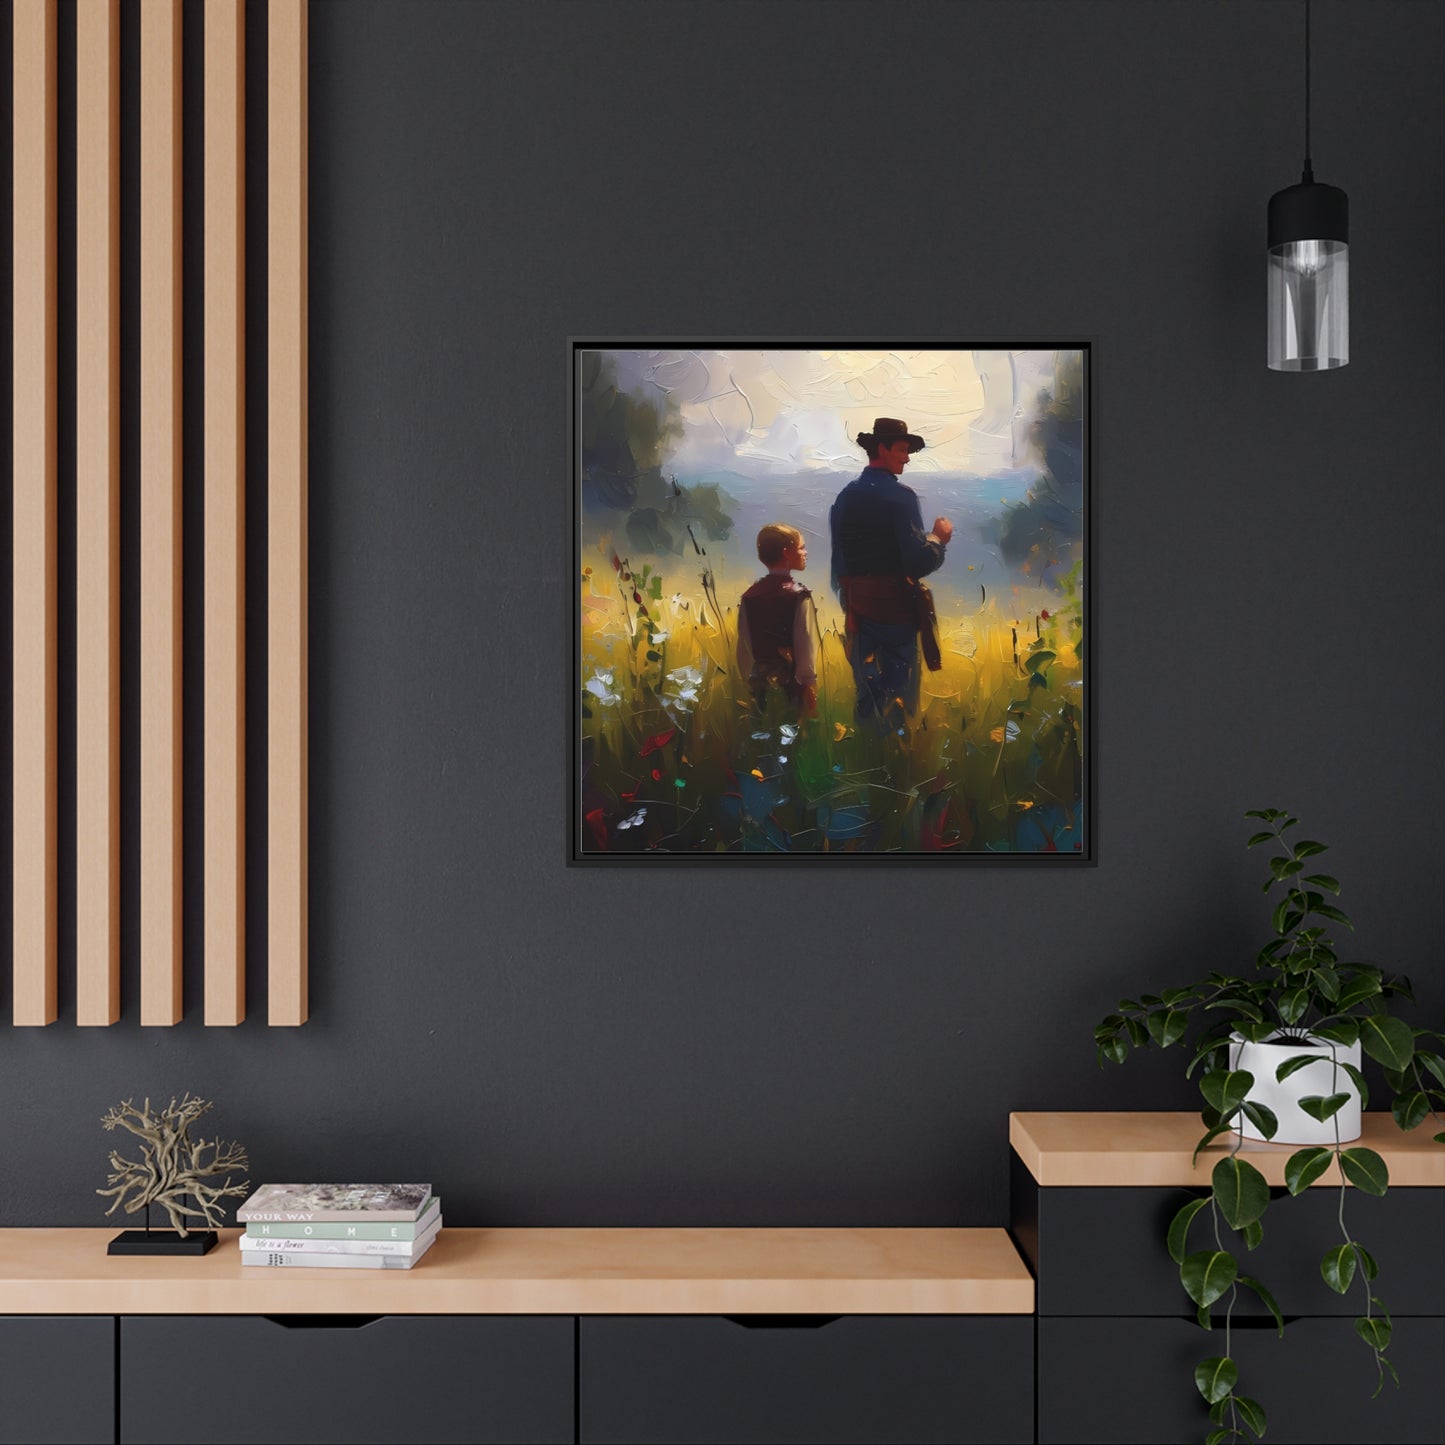 Artwork for Every Room: Shop Wall Art Decor Online